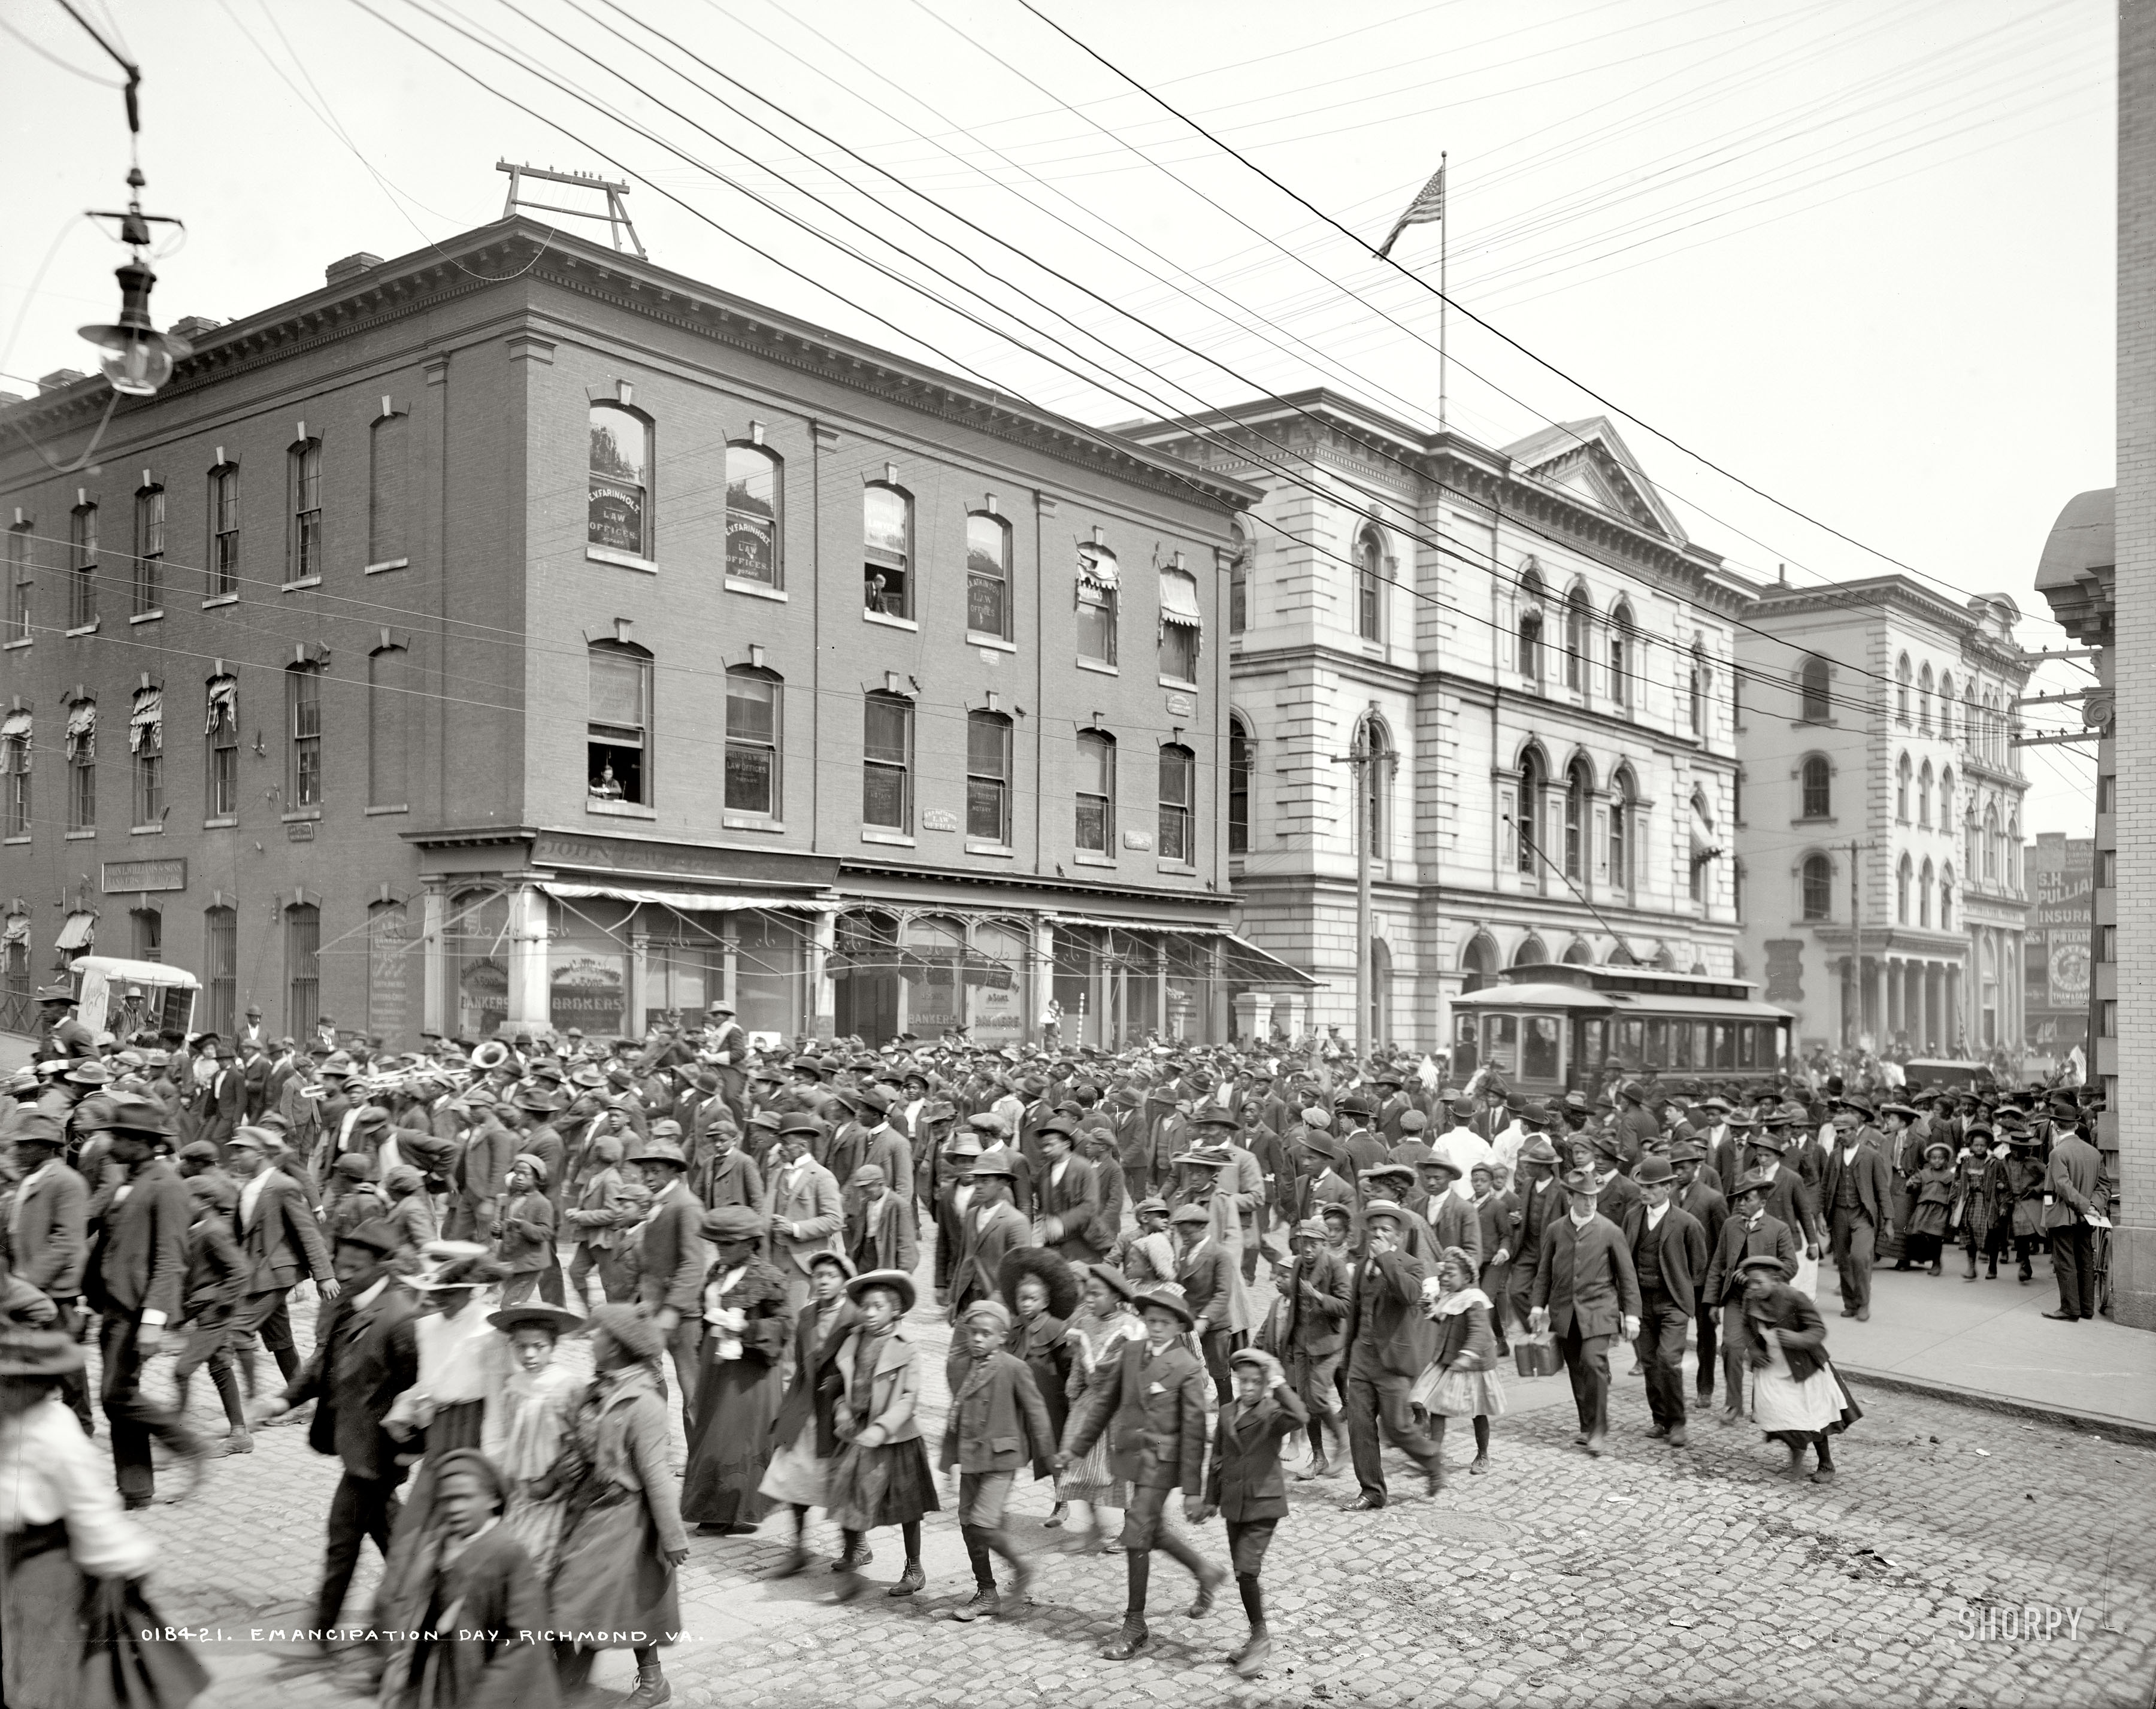 April 3, 1905. Richmond, Virginia. "Emancipation Day." See news item below. 8x10 inch dry plate glass negative, Detroit Publishing Company. View full size.


NEGROES' DAY CELEBRATED.

Inauguration of Colored President Part of the Ceremony.

&nbsp; &nbsp; &nbsp; &nbsp; Richmond, Va., April 3 -- Thousands of Negroes observed Emancipation Day in Virginia to-day. The occasion resulted in an outpouring of the race never before equaled, armed with miniature United States flags and attended by brass bands.

&nbsp; &nbsp; &nbsp; &nbsp; In addition, there was a unique feature to-night, the inauguration of a colored President. At True Reformers' Hall the interior of the White House was reproduced, and all the ceremonies incident to the induction of a Chief Magistrate into office were gone through with.

&nbsp; &nbsp; &nbsp; &nbsp; To-day was also the fortieth anniversary of the evacuation of Richmond by the Confederate forces and the partial destruction of the city by fire. (Washington Post, April 4, 1905.)
